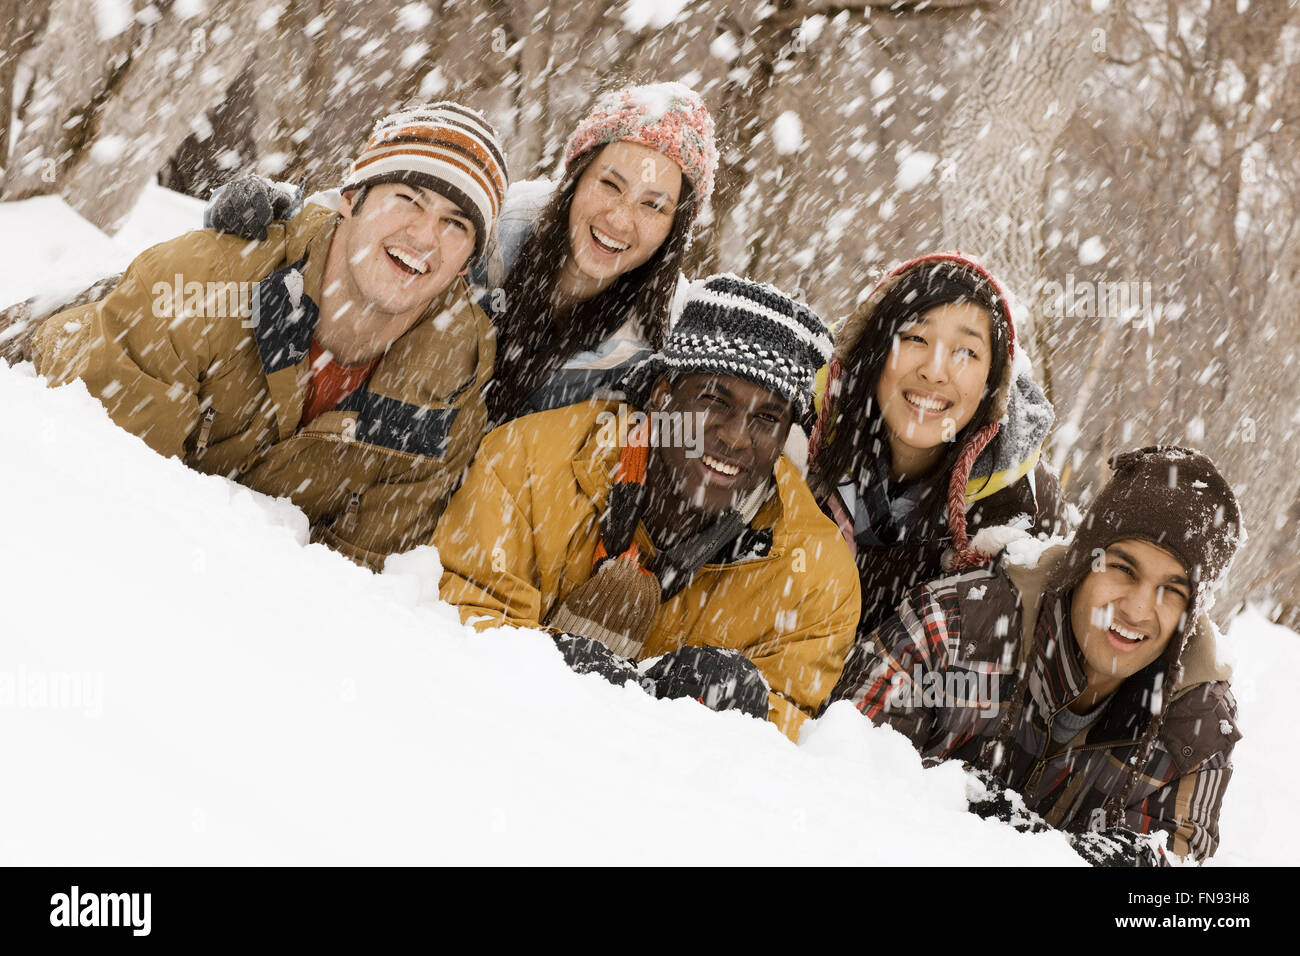 Five young people lying on the snow laughing. Snow falling. Stock Photo